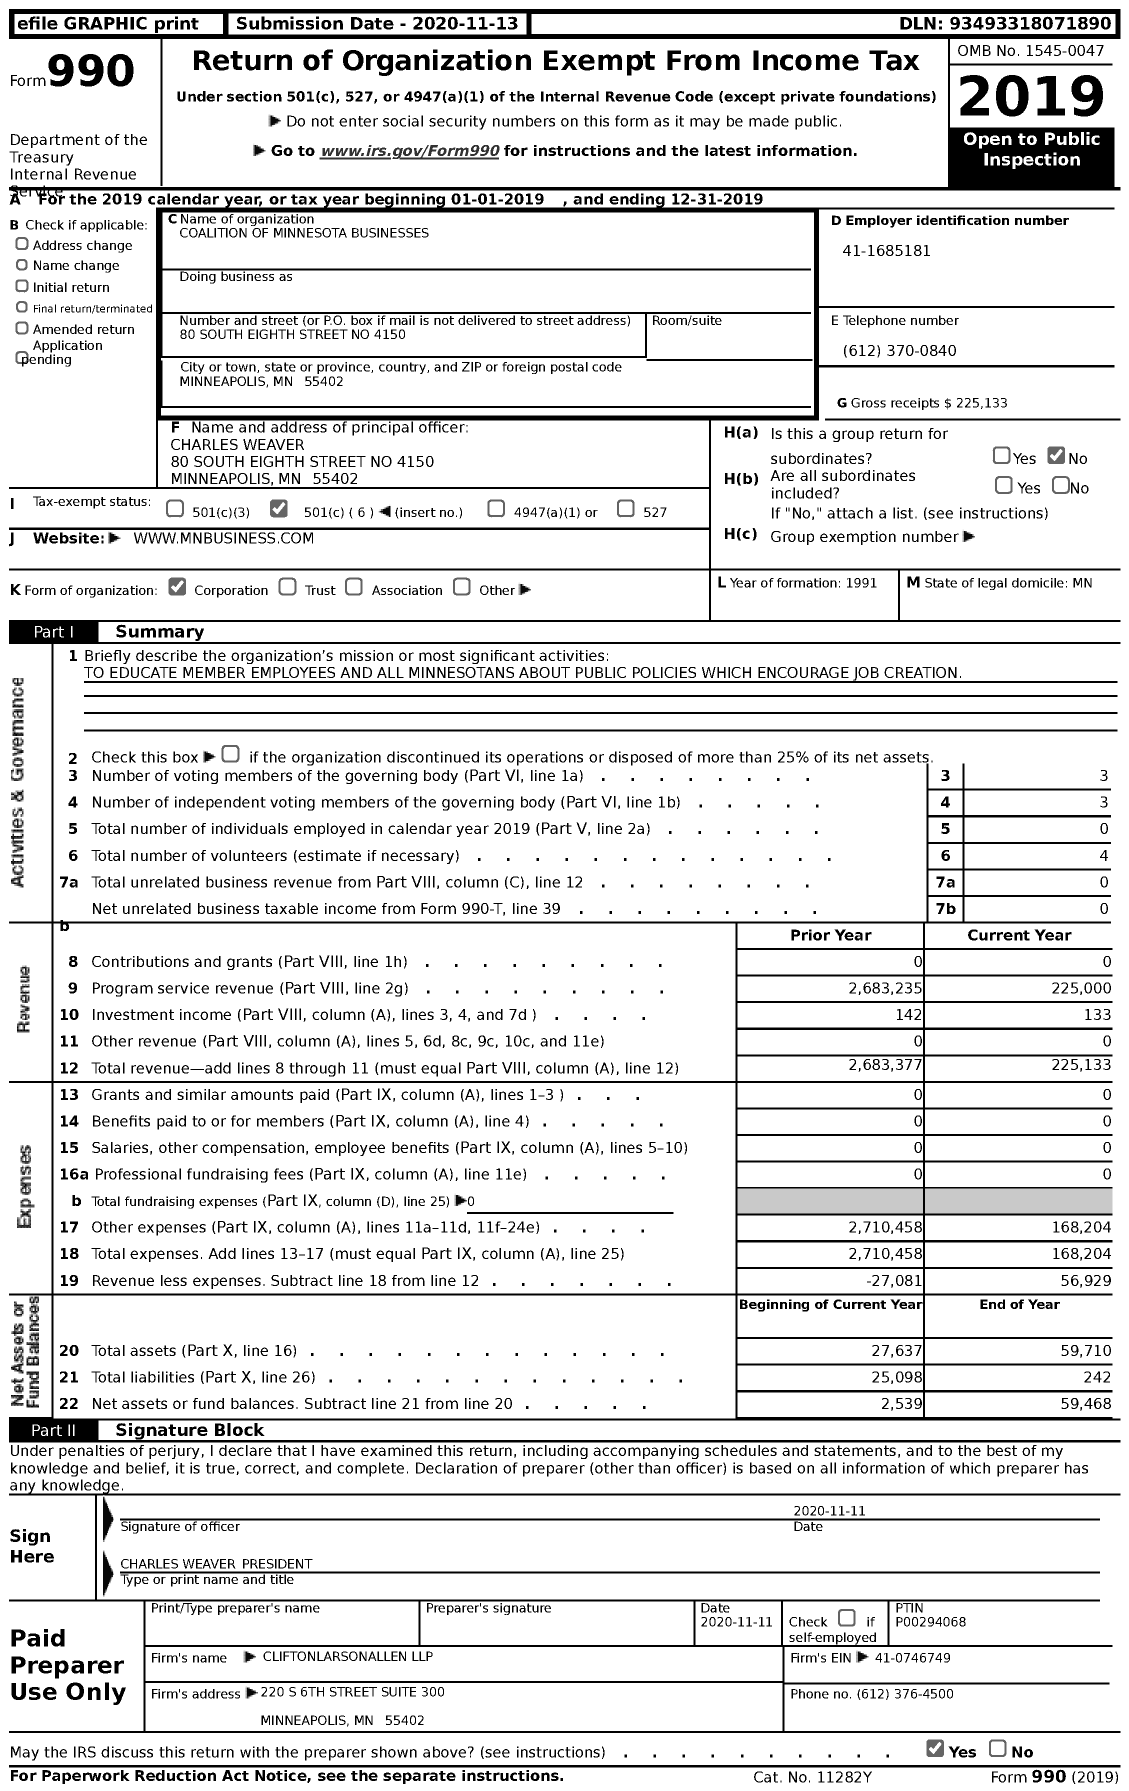 Image of first page of 2019 Form 990 for Coalition of Minnesota Businesses (CMB)